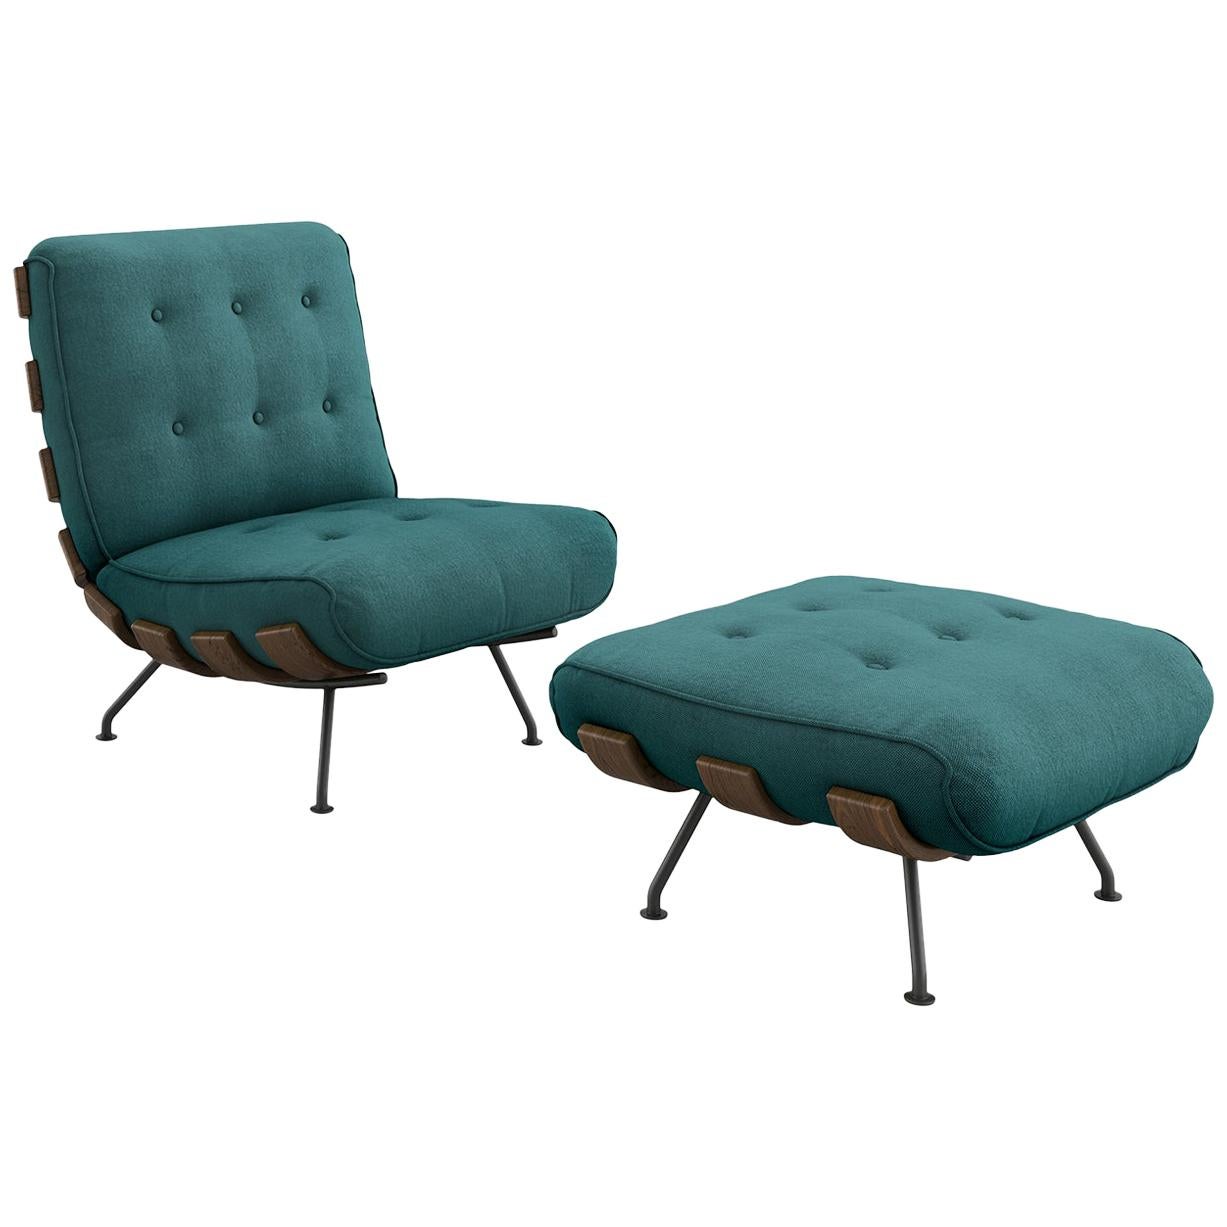 Tacchini Costela Chair with Ottoman in Green Bryony Fabric by Martin Eisler For Sale